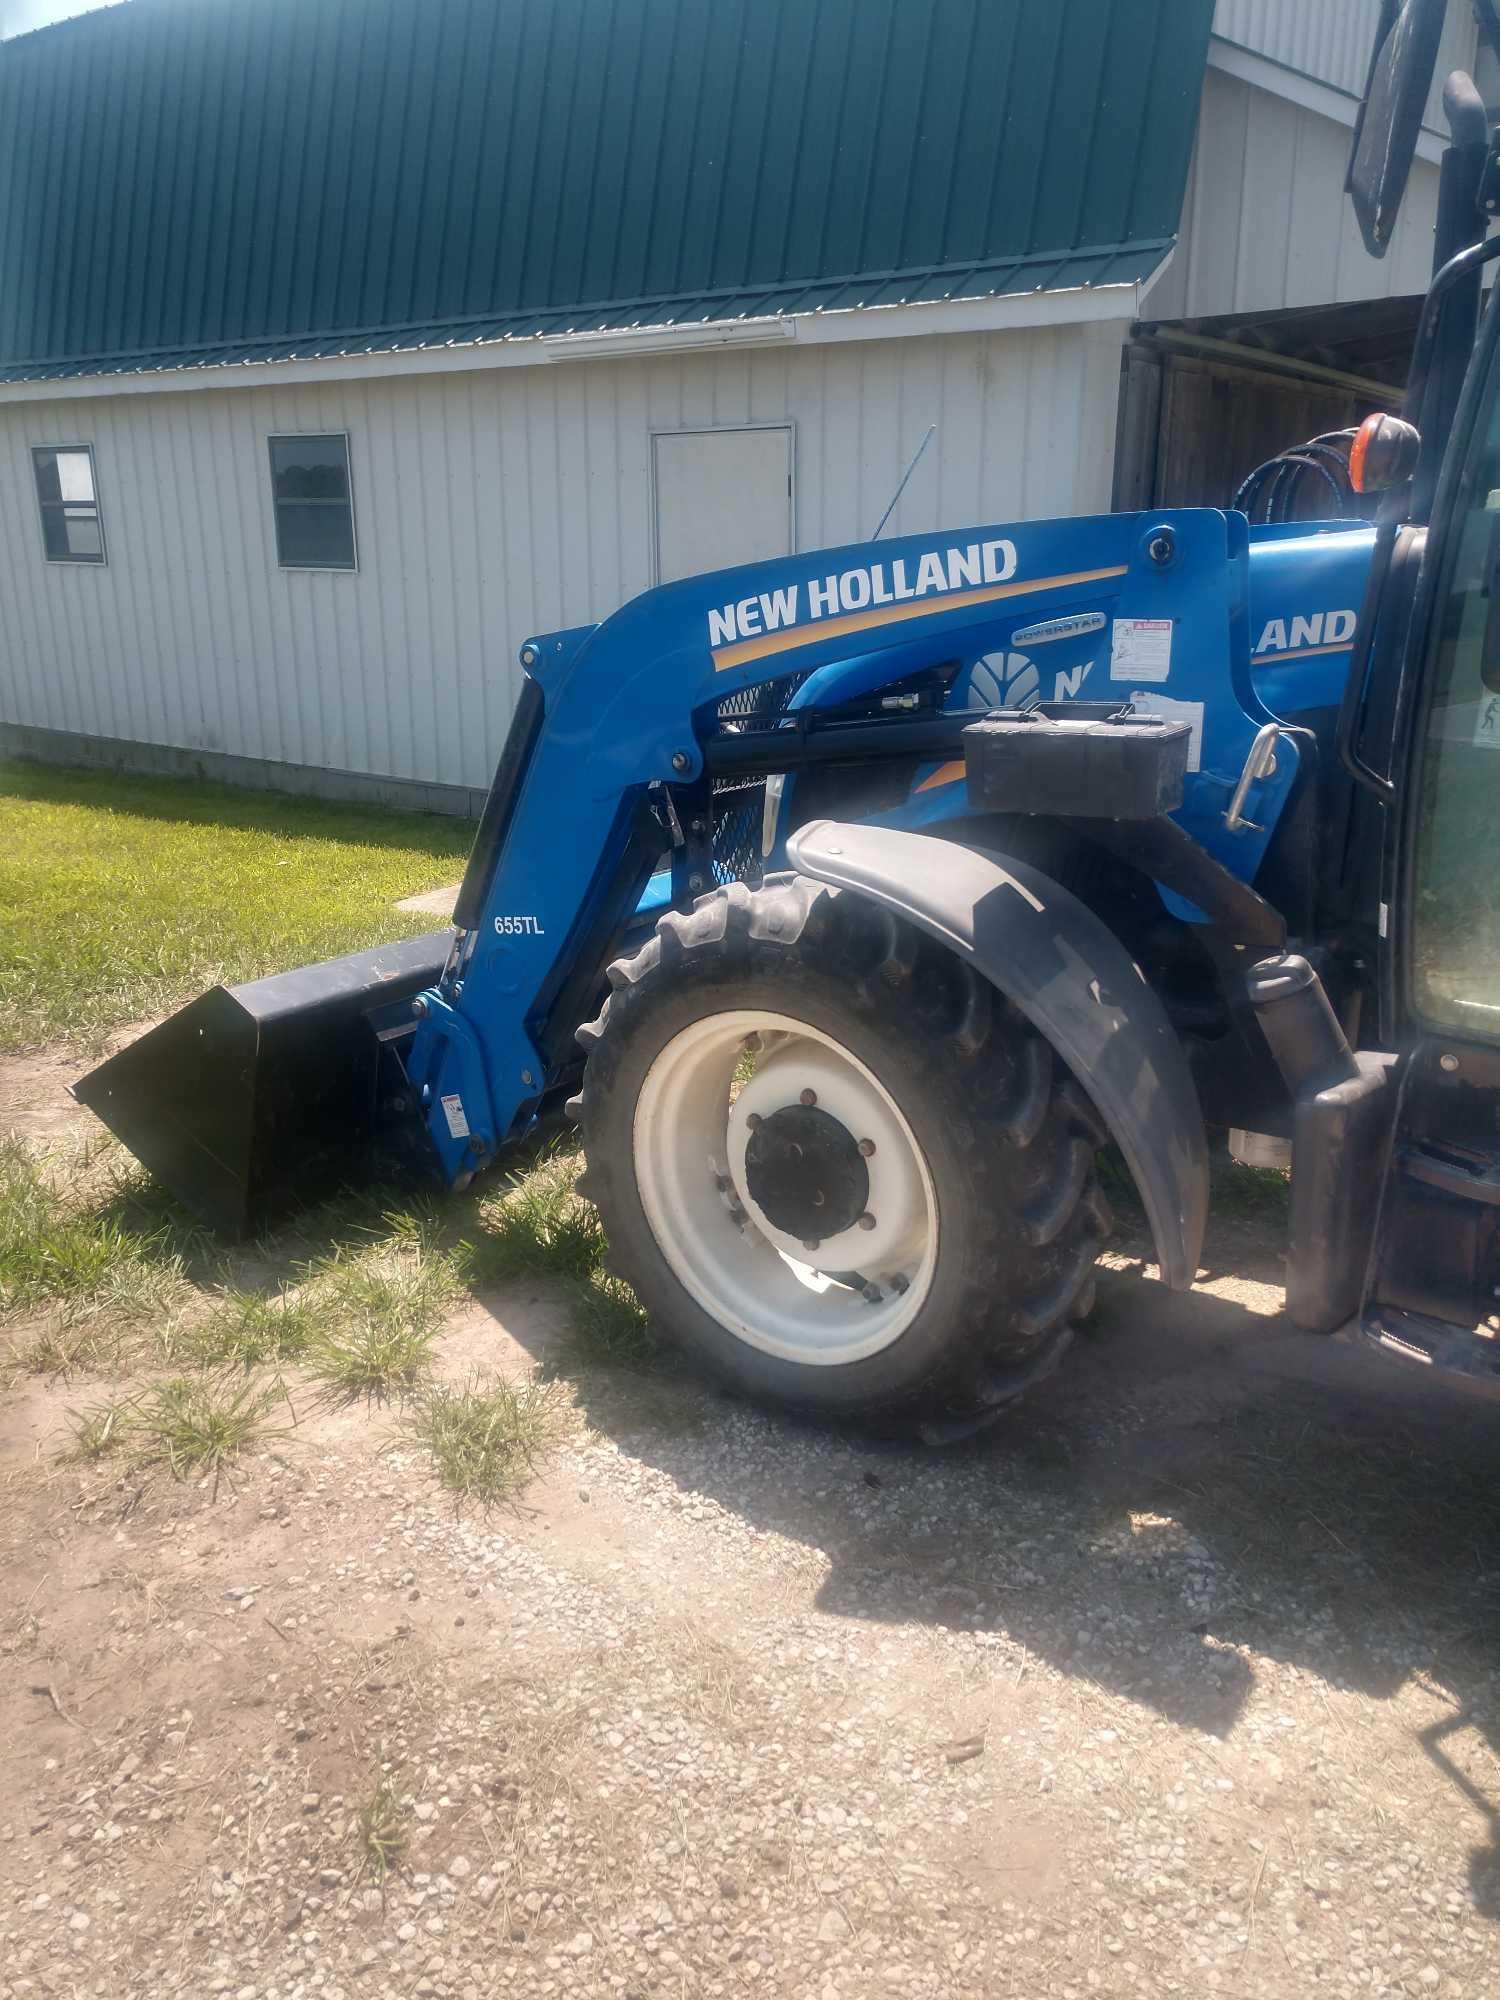 2015 New Holland T4.75 Tractor w/ 655TL loader and bucket